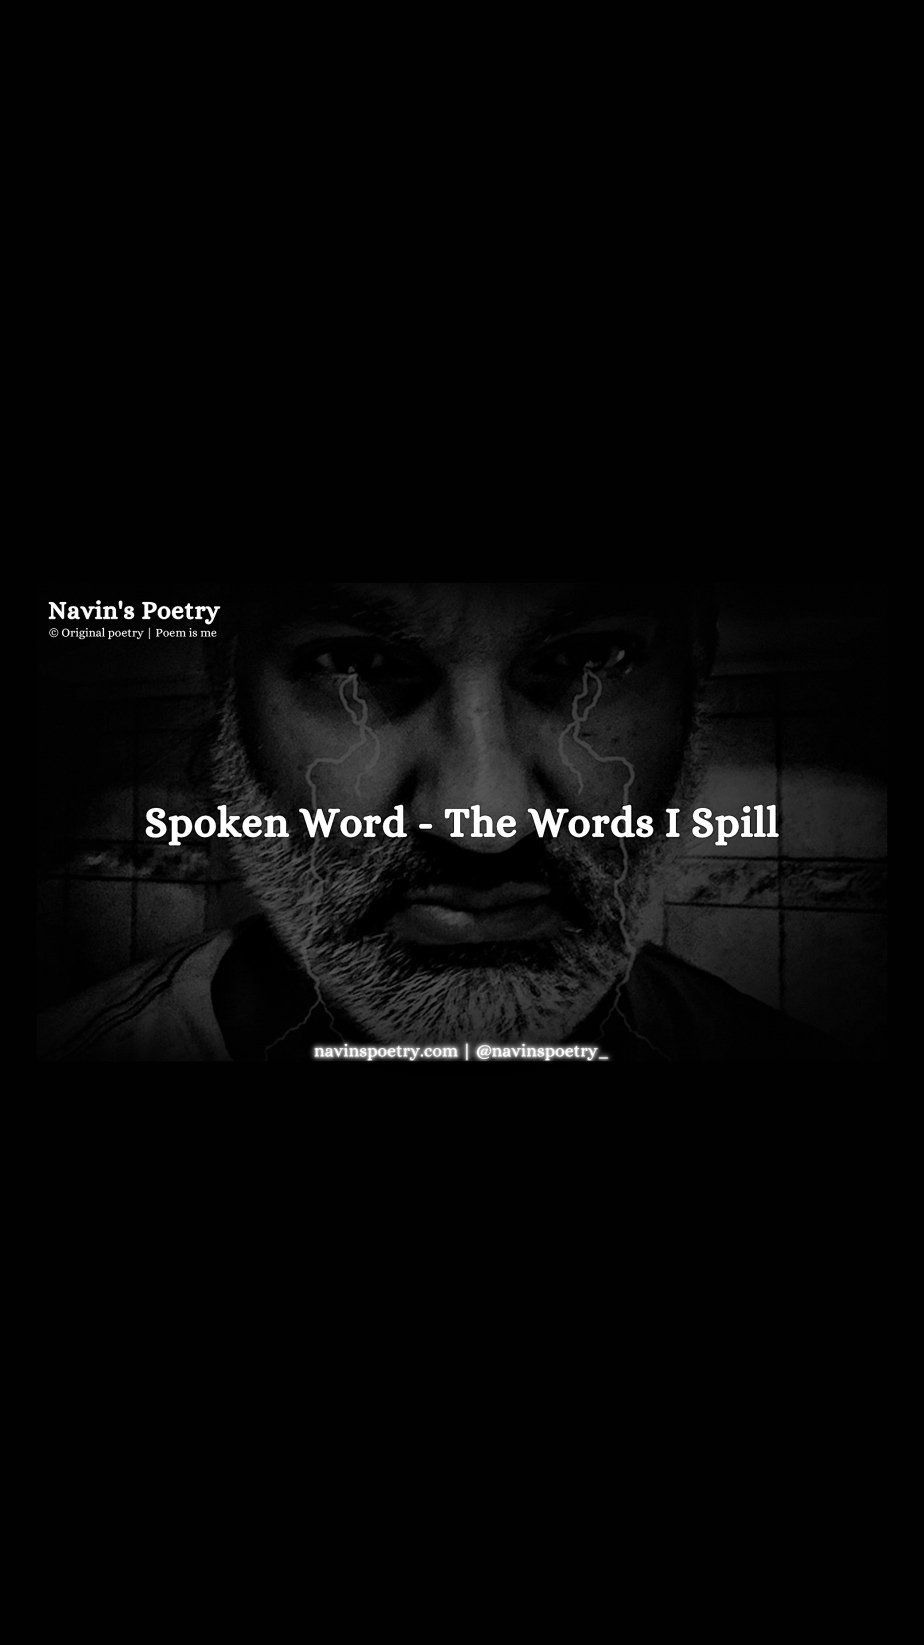 Spoken Word – The Words I Spill (YouTube channel)